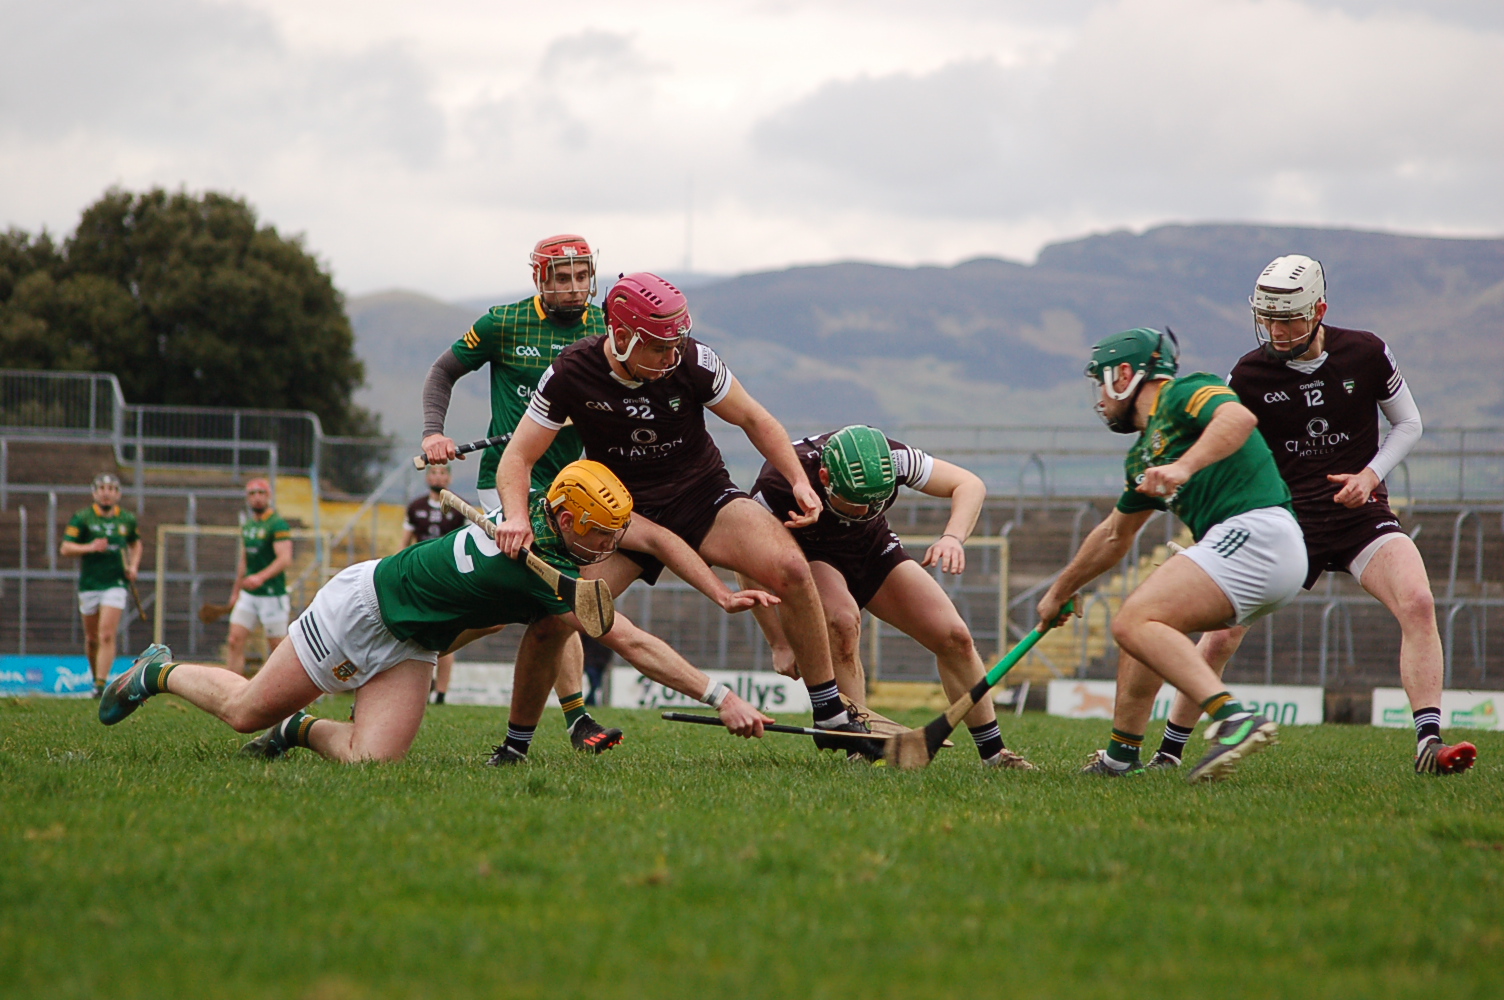 Battling performance from senior hurlers but still without points